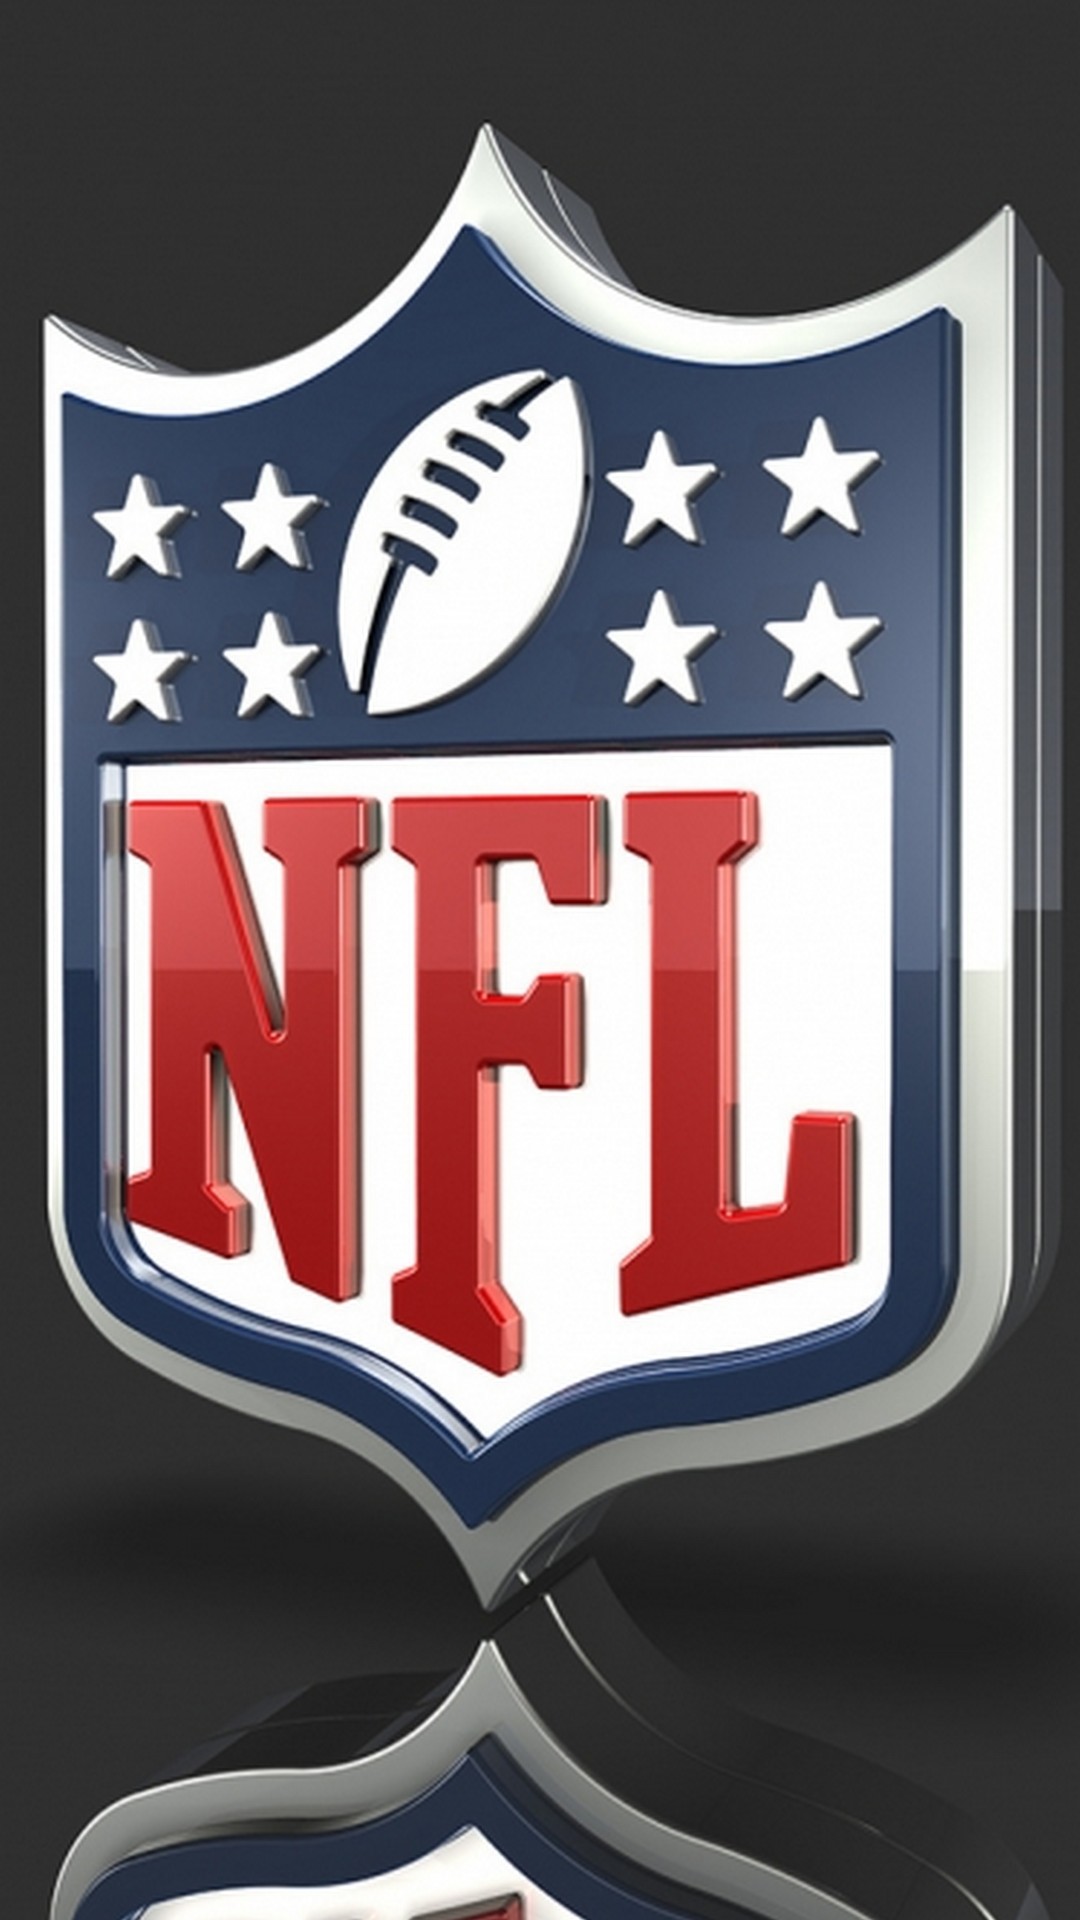 NFL iPhone Backgrounds with high-resolution 1080x1920 pixel. Download and set as wallpaper for Apple iPhone X, XS Max, XR, 8, 7, 6, SE, iPad, Android